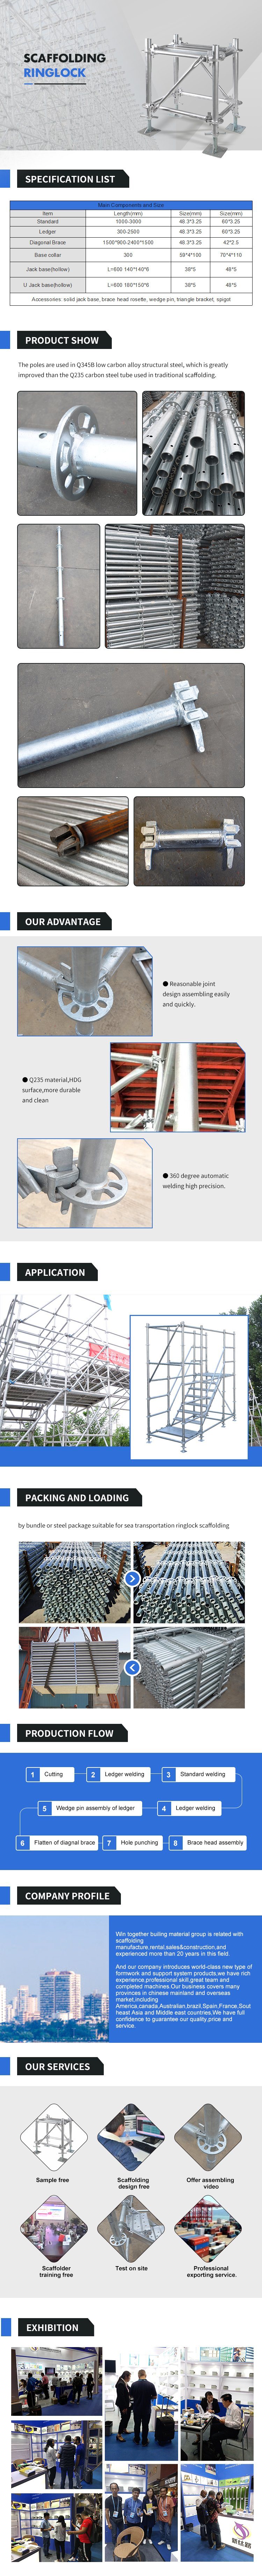 Modular Tubular Ringlock System Scaffold and Accessories for Construction